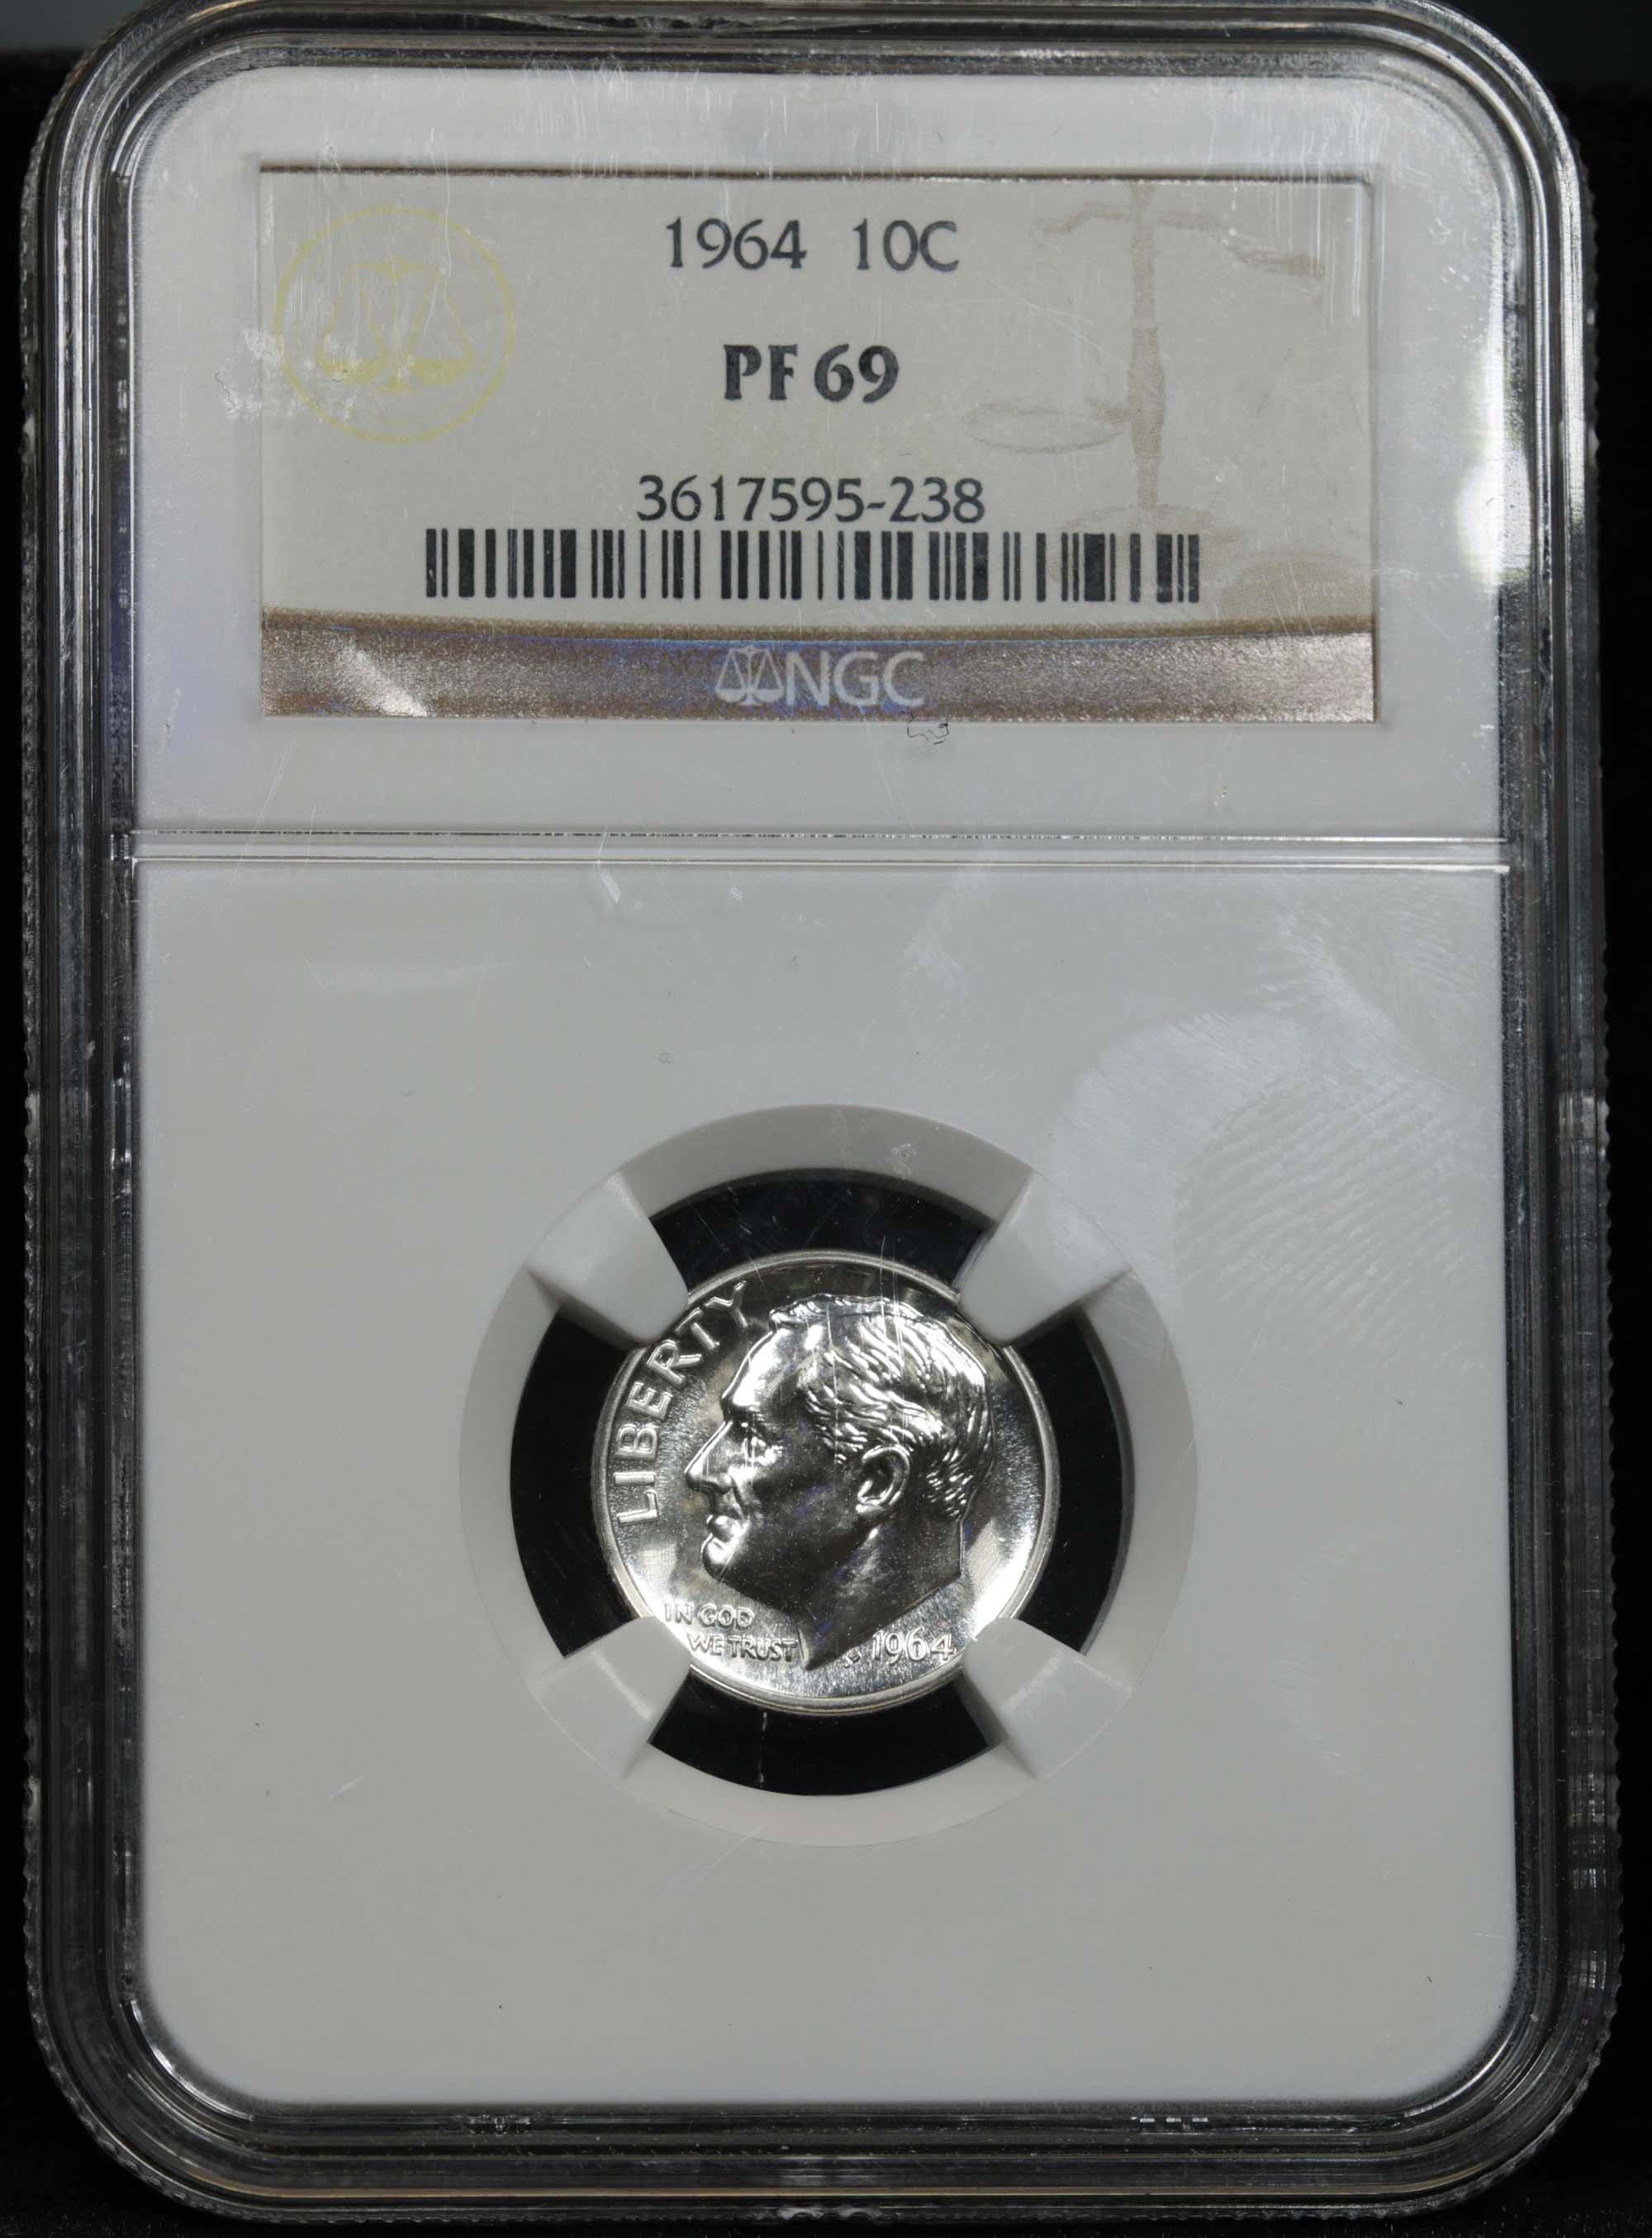 Spectacular NGC 1964 Roosevelt Dime 10c Graded pf69 By NGC near perfection